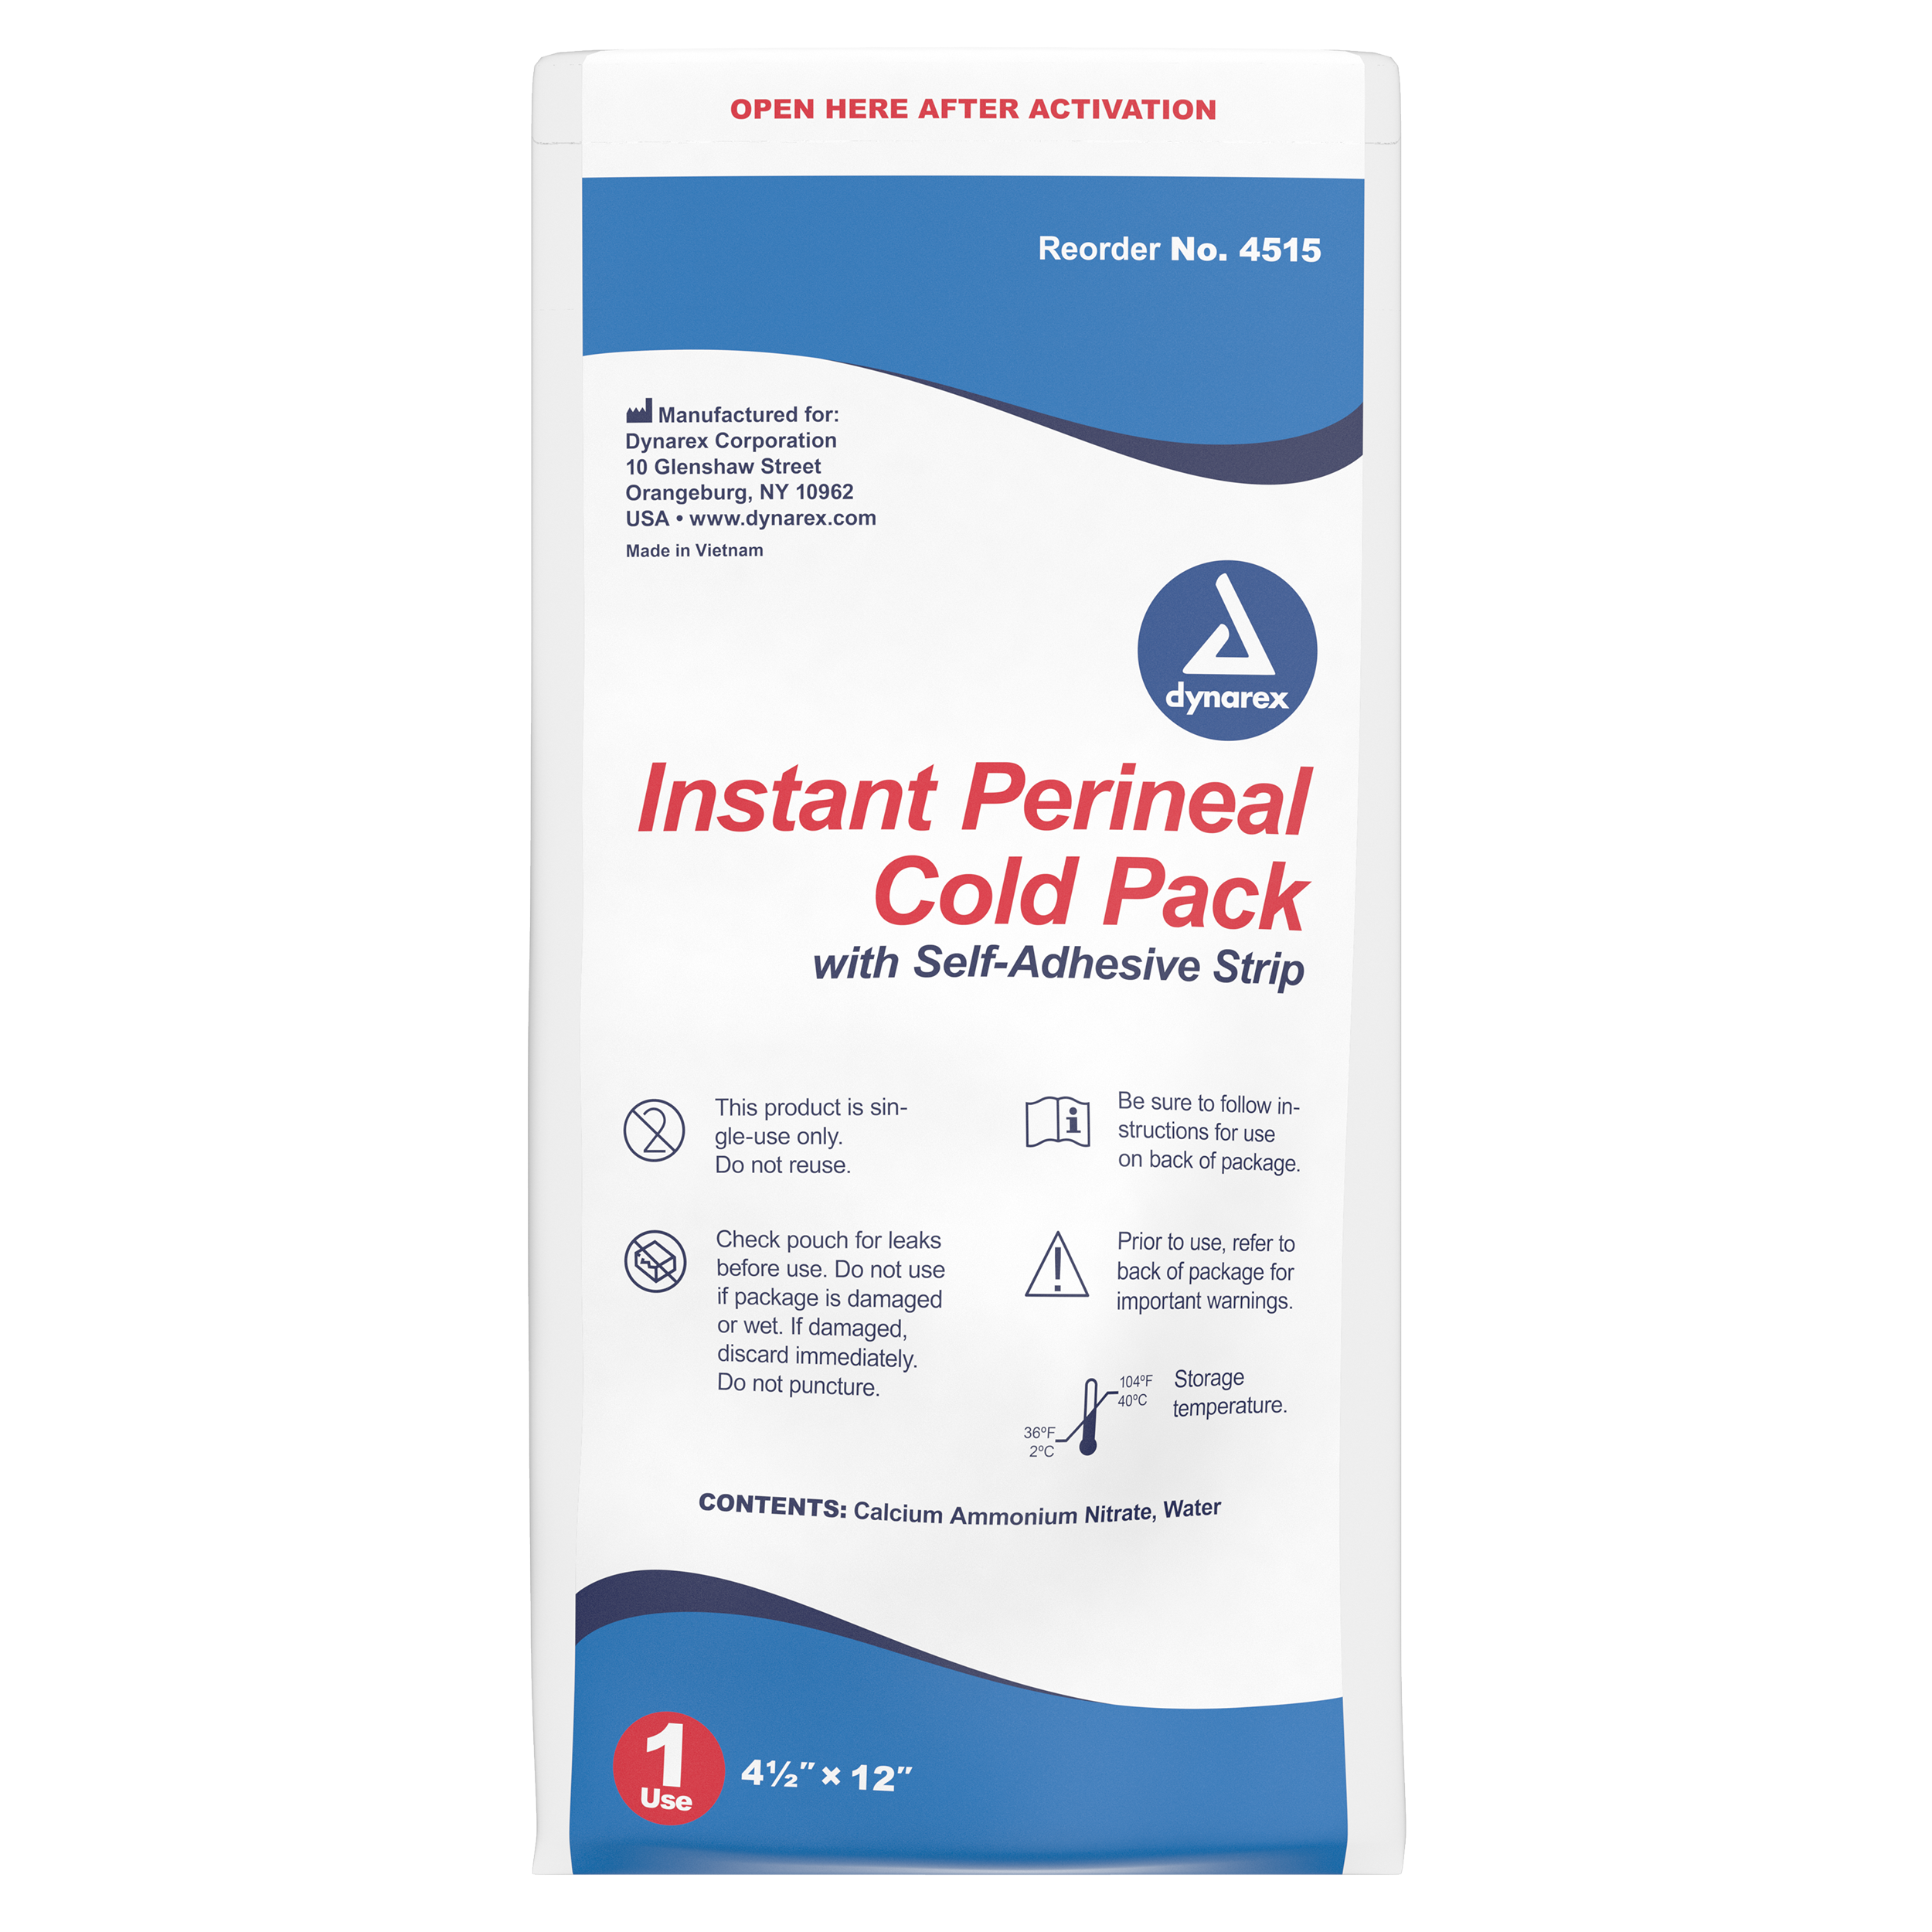 Perineal Instant Cold Pack with self adhesive strip, 4 1/2